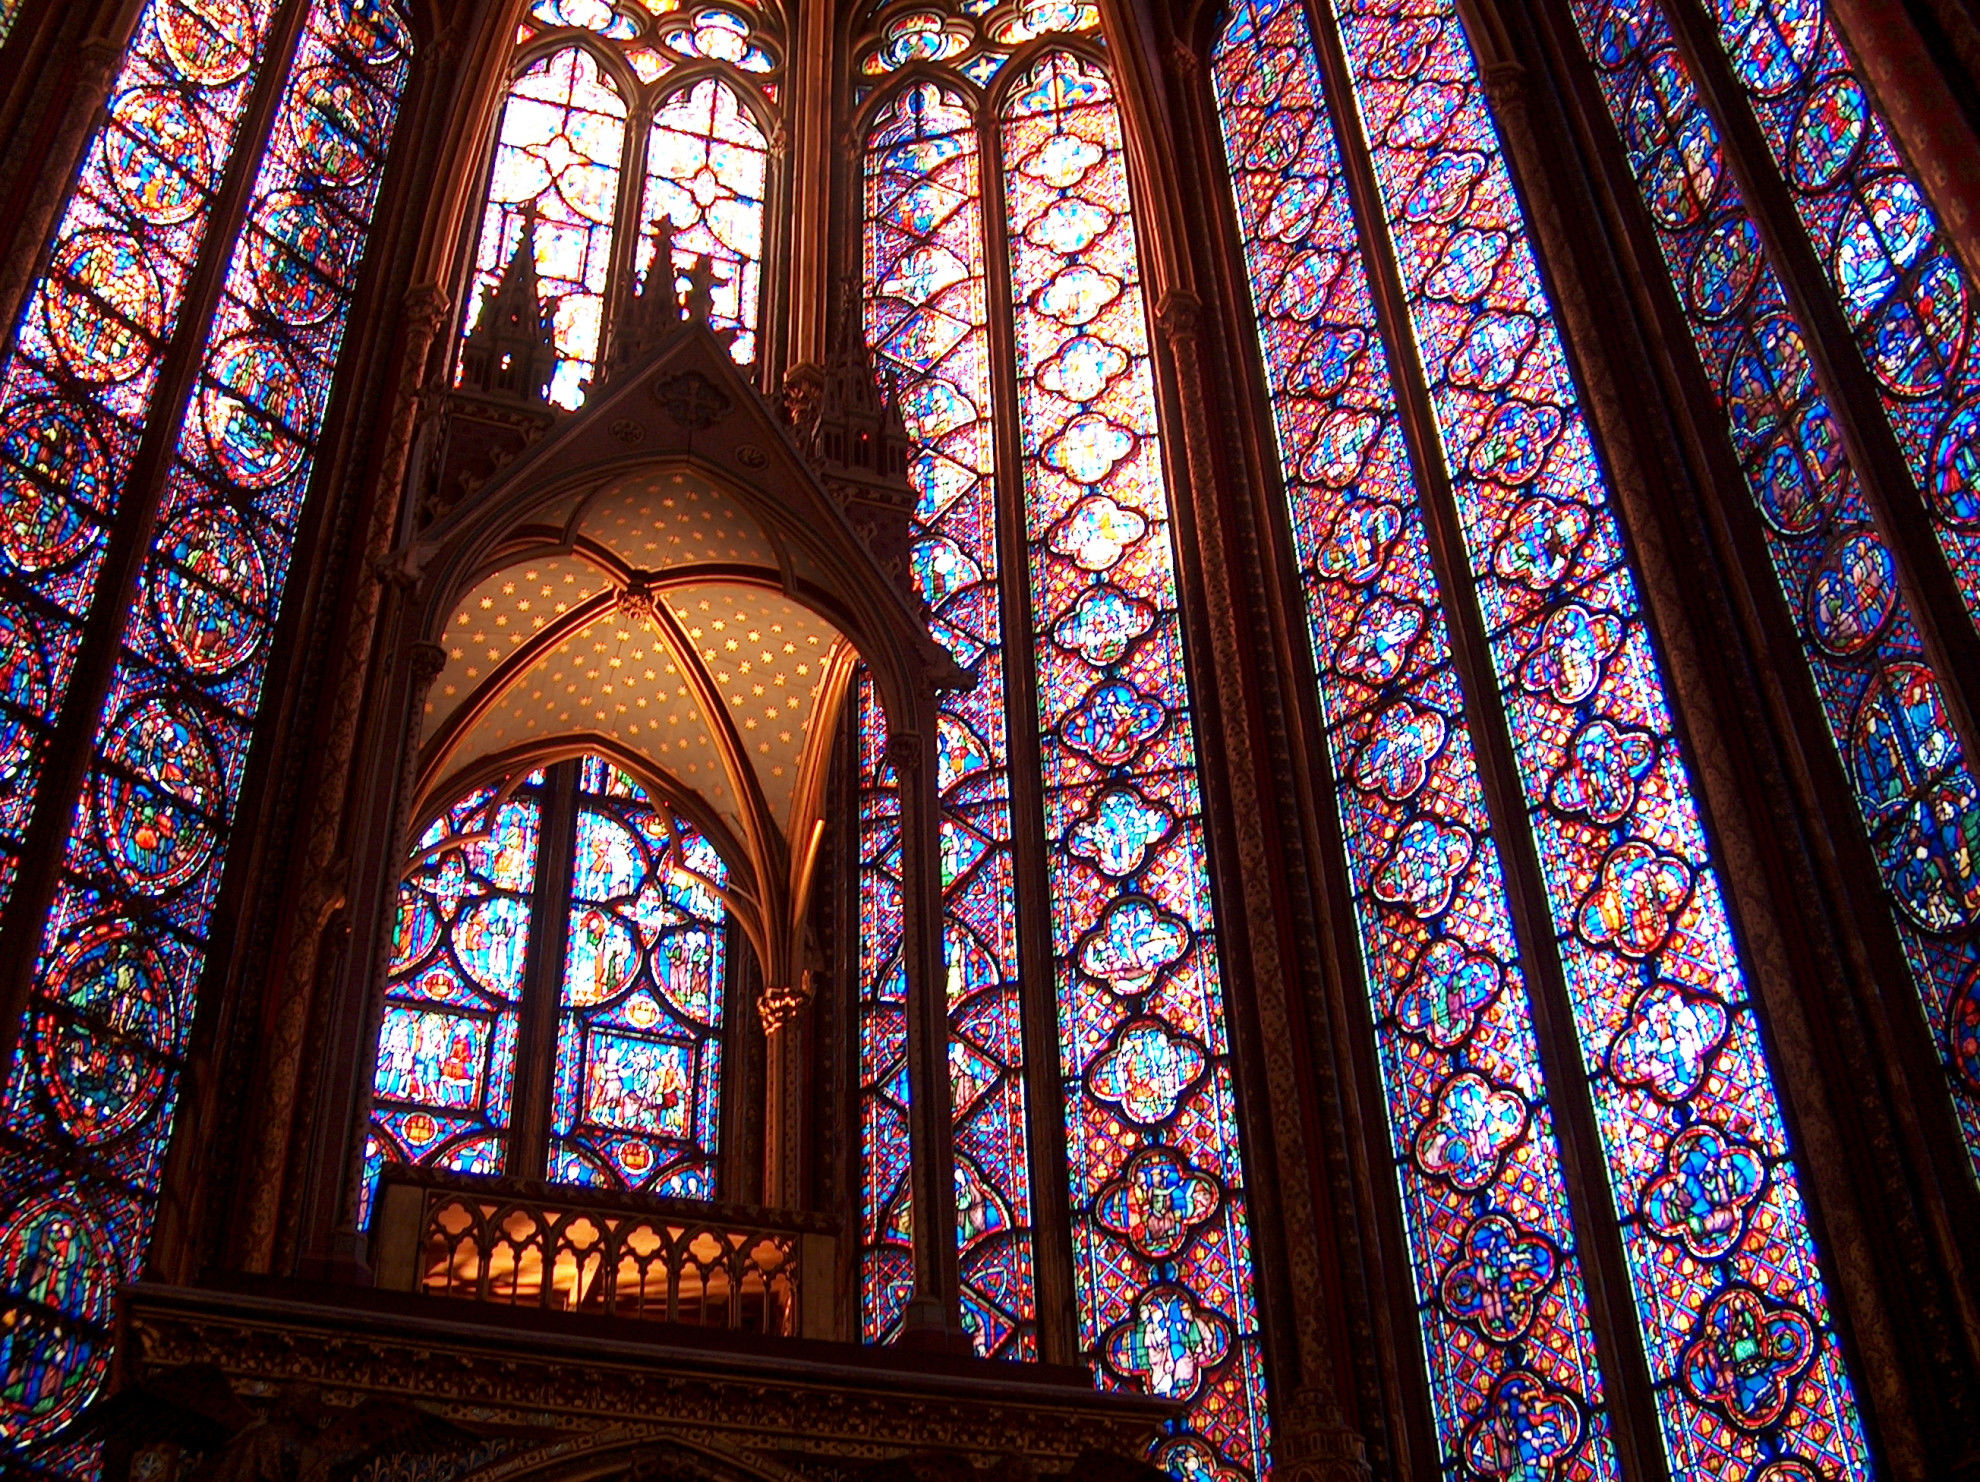 Stained glass art example Sainte-Chapelle in Paris.